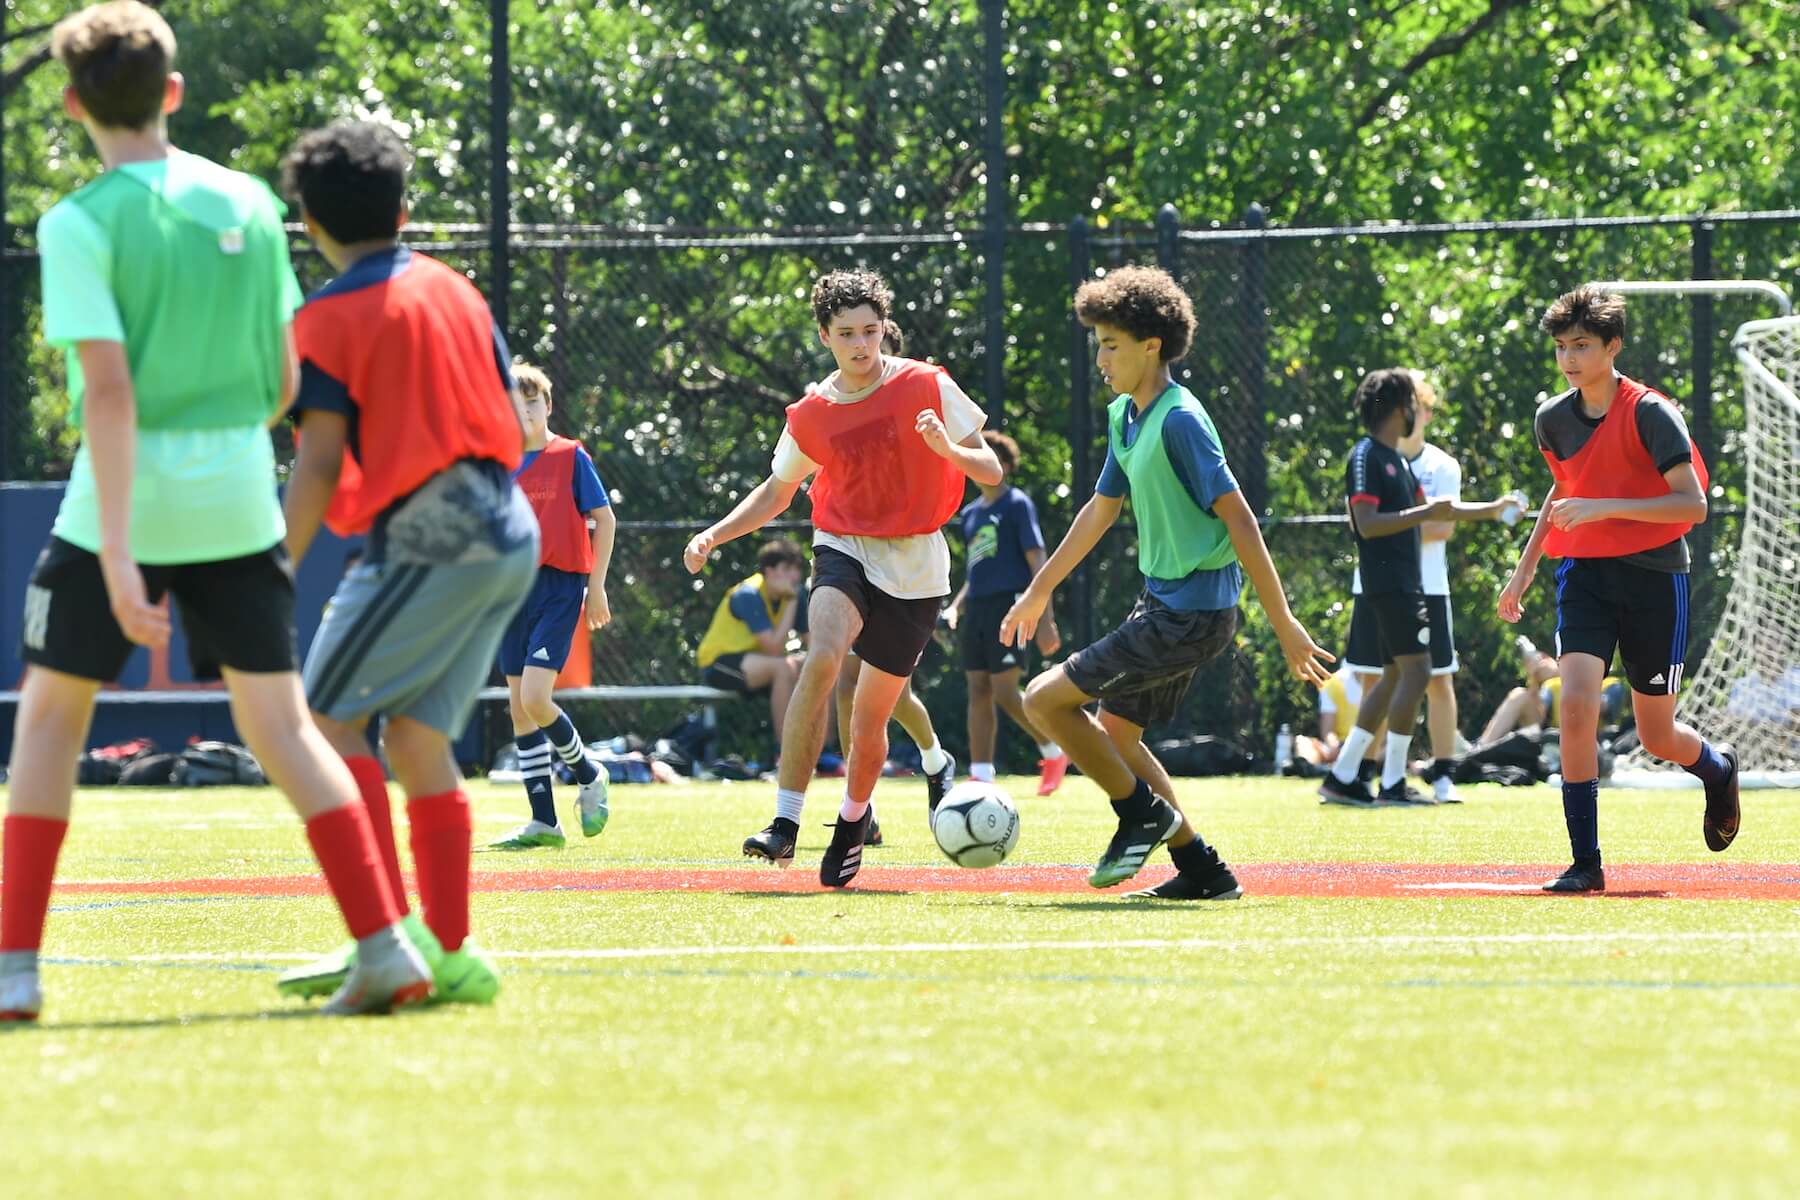 Ethical Culture Fieldston School Middle School soccer players in action on the field